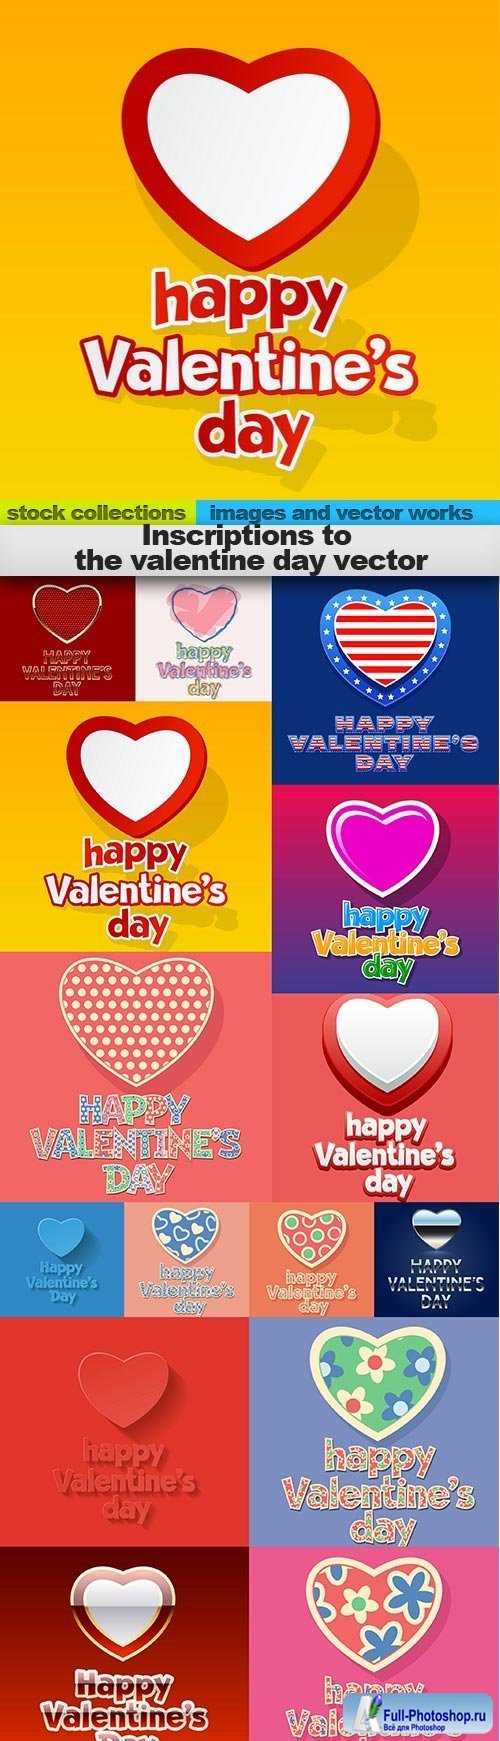 Inscriptions to the valentine day vector, 15 x EPS